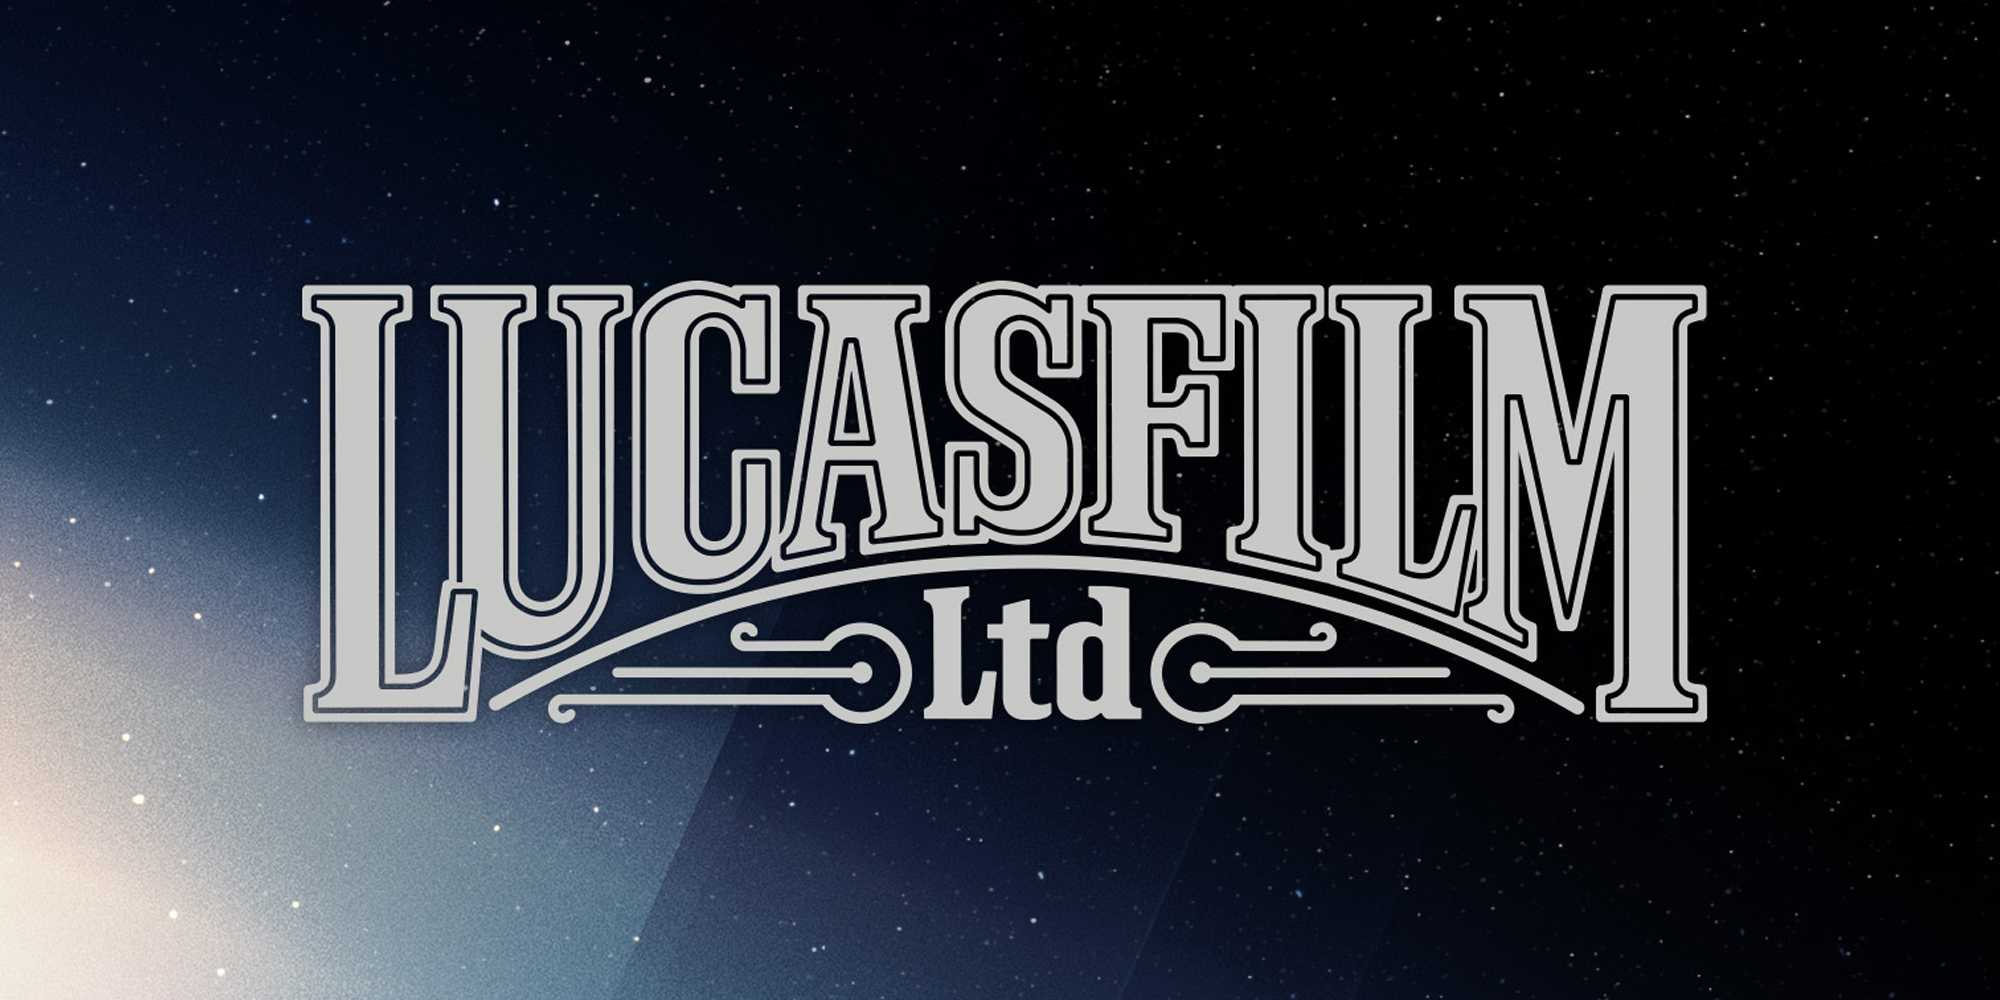 Future Lucasfilm Projects Announced